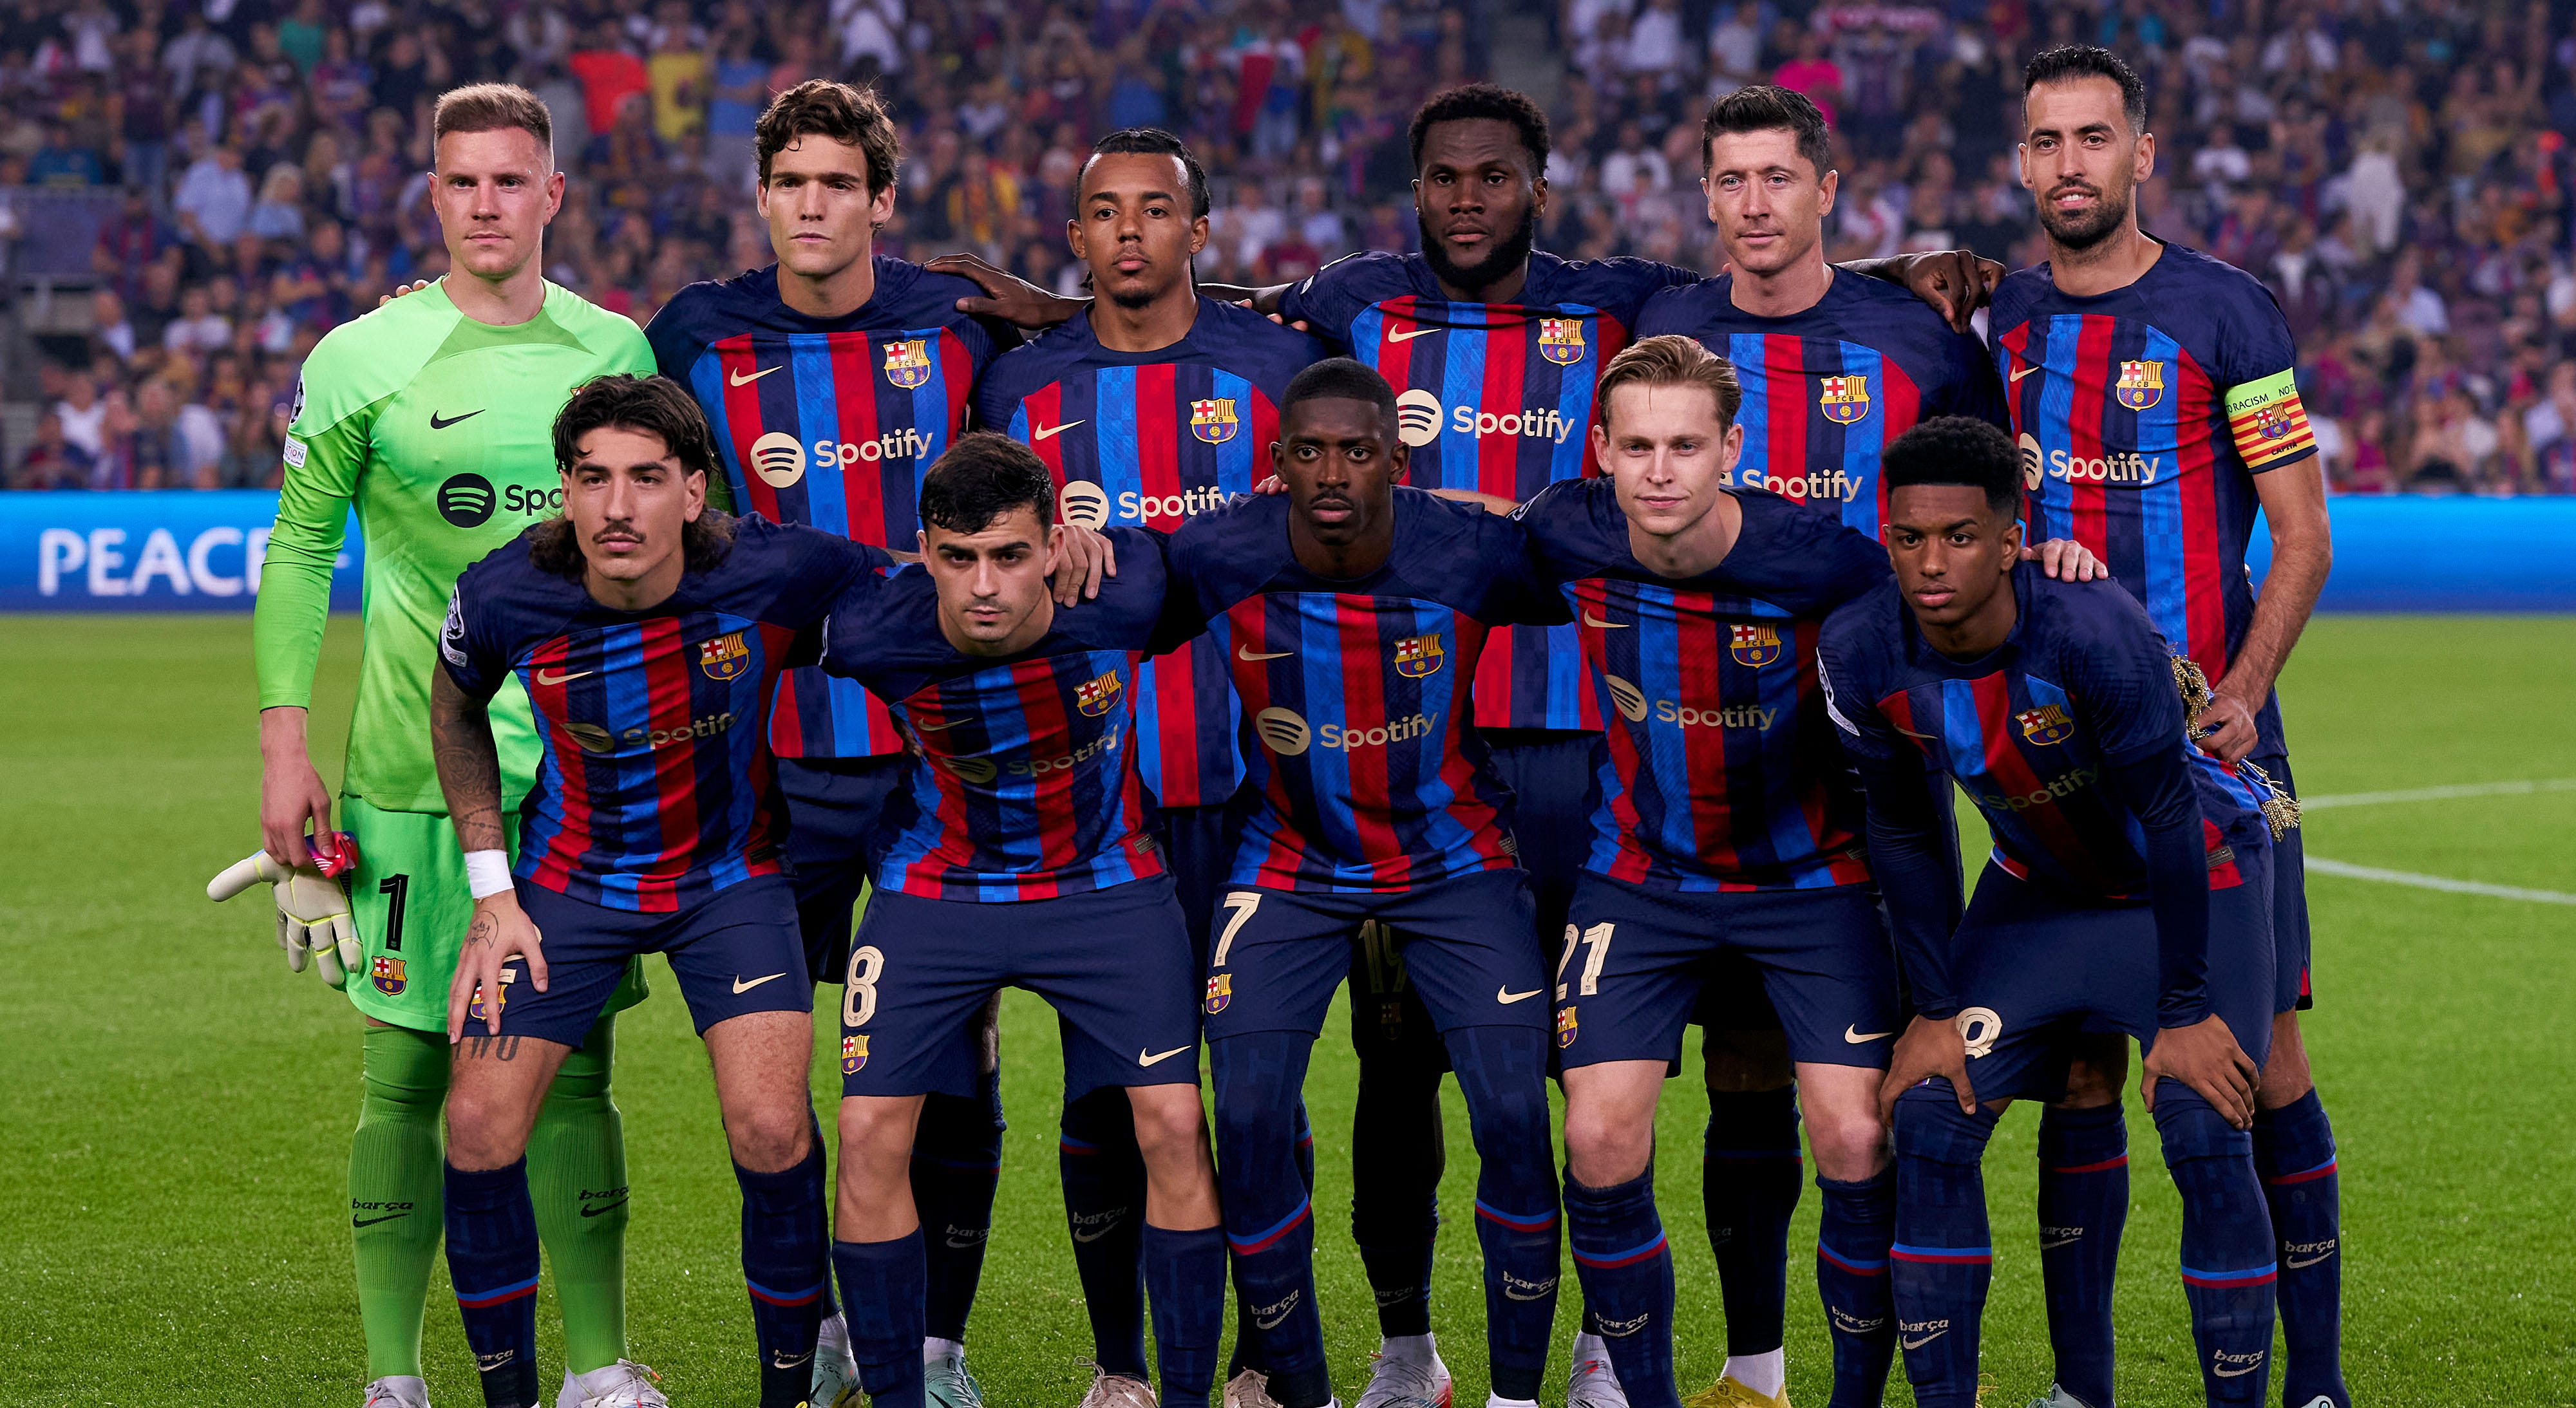 Barcelona knocked out of UEFA Champions League for second straight year